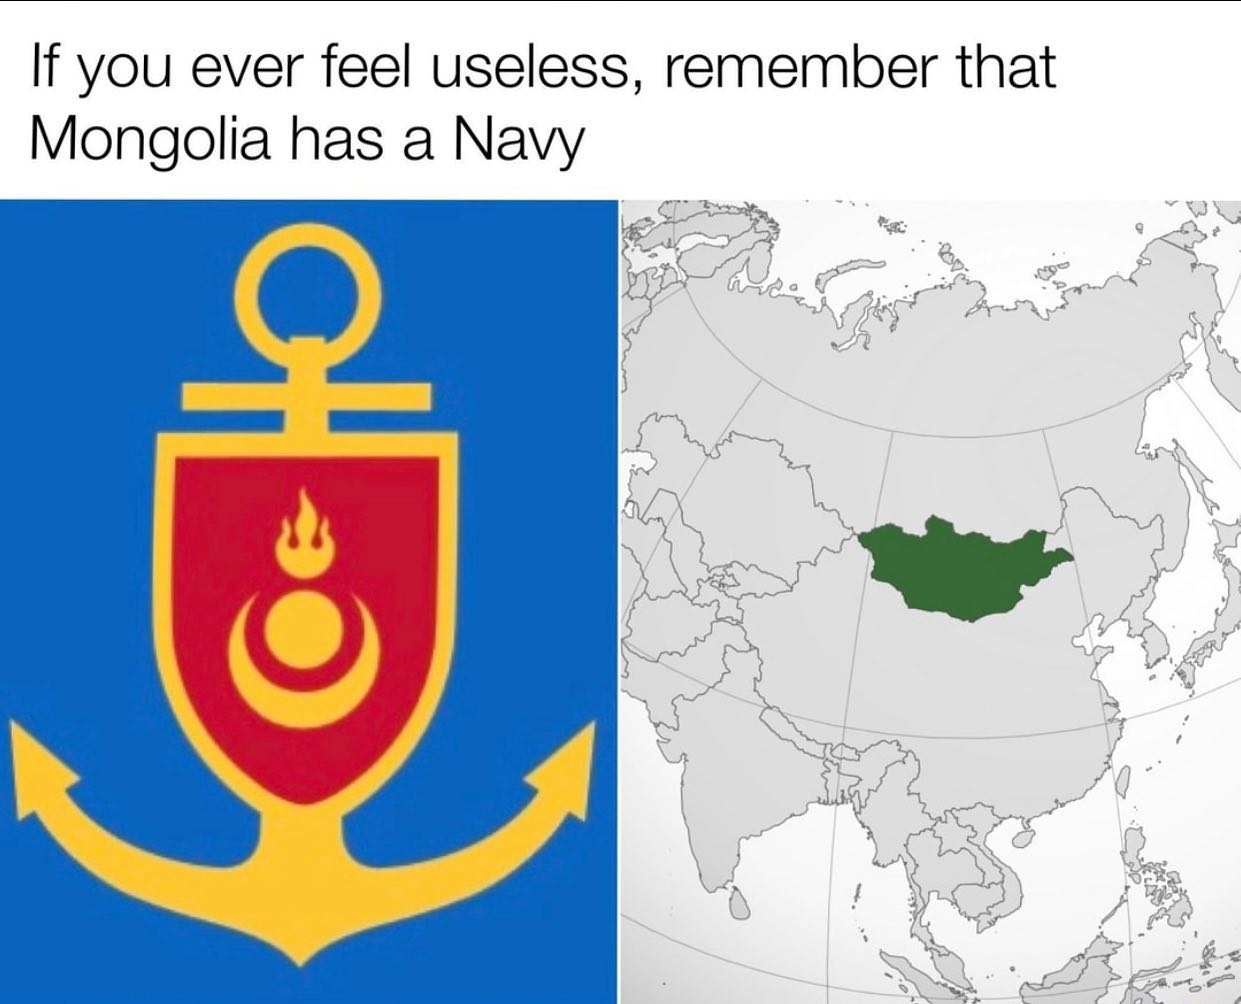 dank memes - If you ever feel useless, remember that Mongolia has a Navy